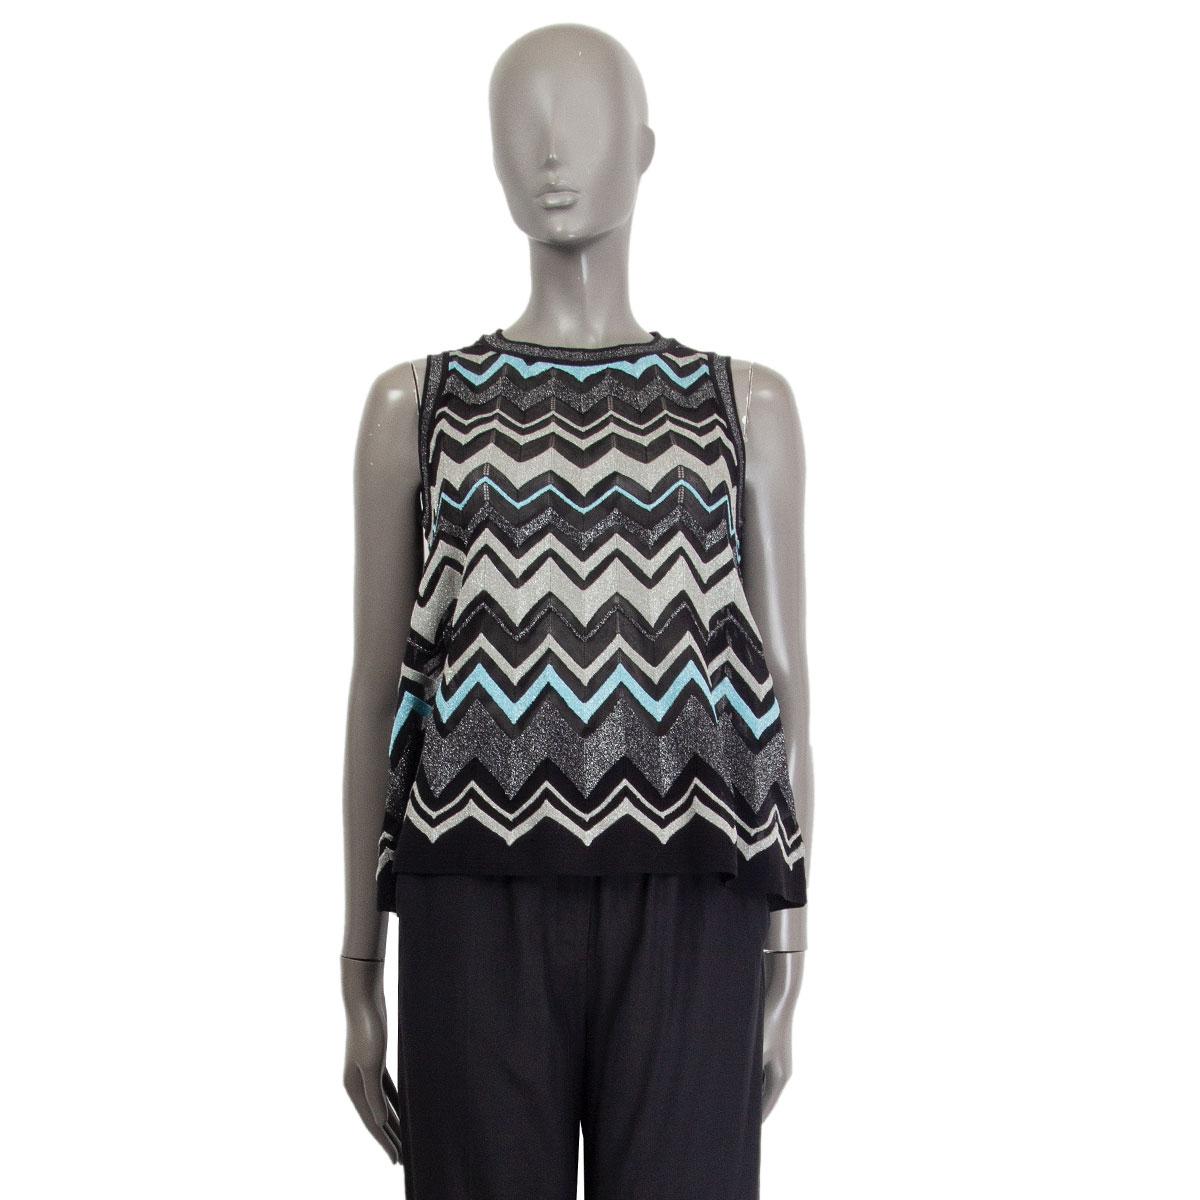 100% authentic M Missoni oversized sleeveless sheer knit top in black, grey lurex, silver lurex and light blue lurex polyamide (68%), cotton (20%) and metallised fibre (12%) classic Missoni zig-zag motif. Has been worn and is in excellent condition.